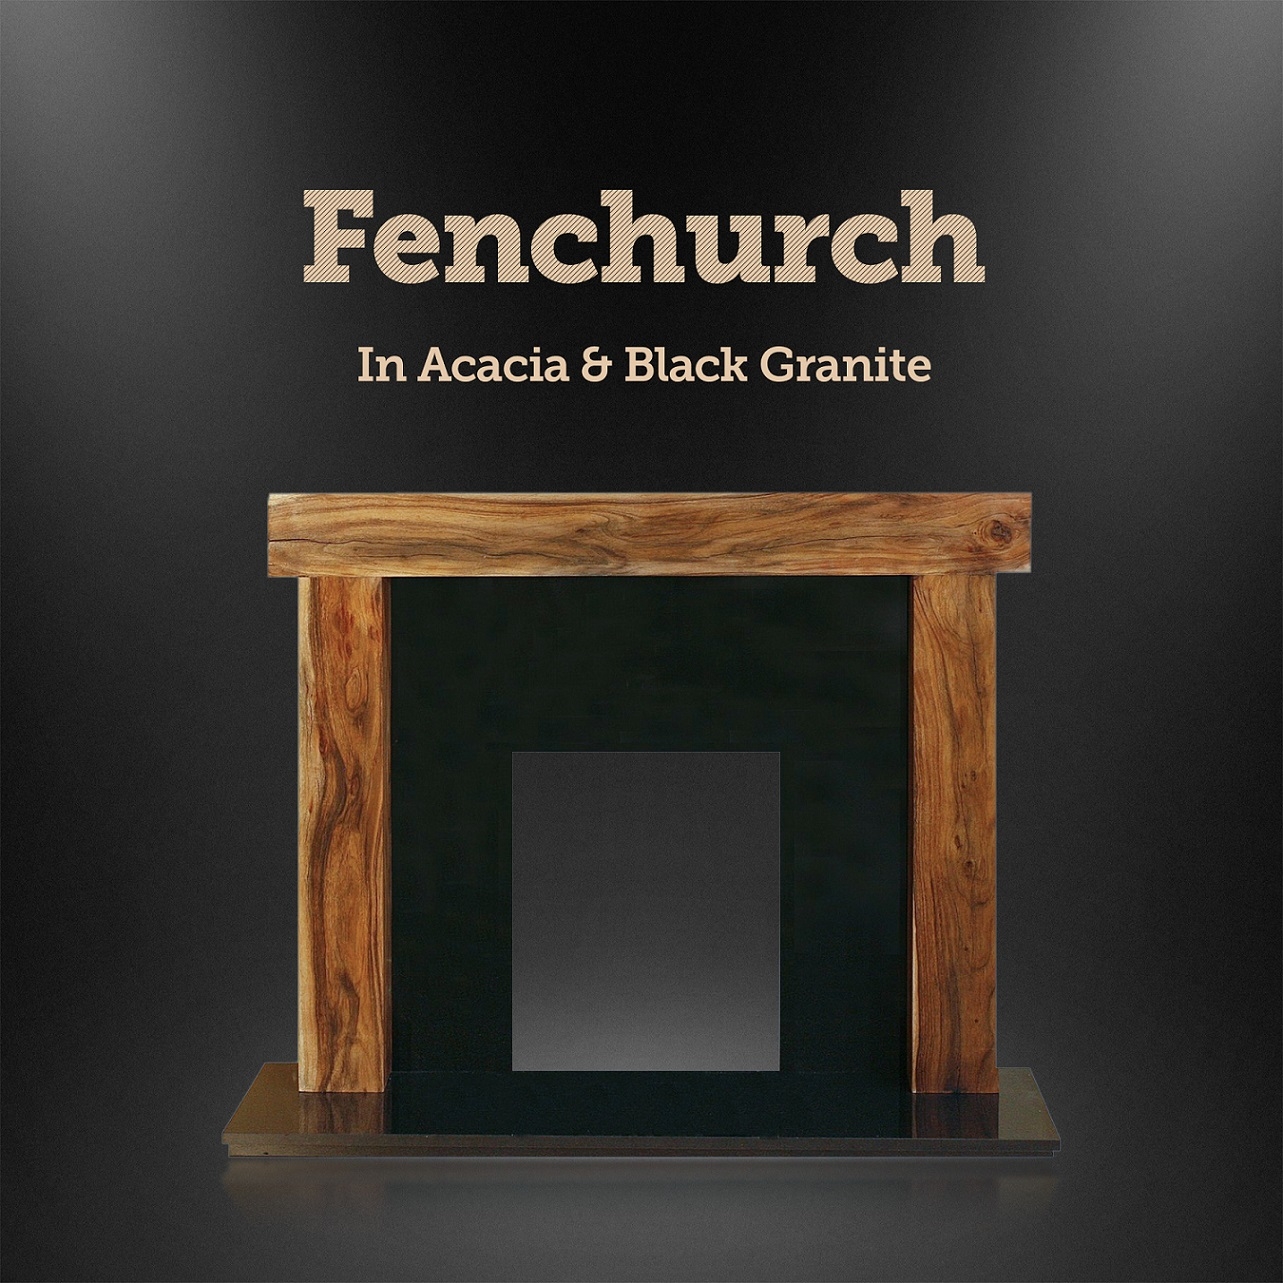 The Fenchurch